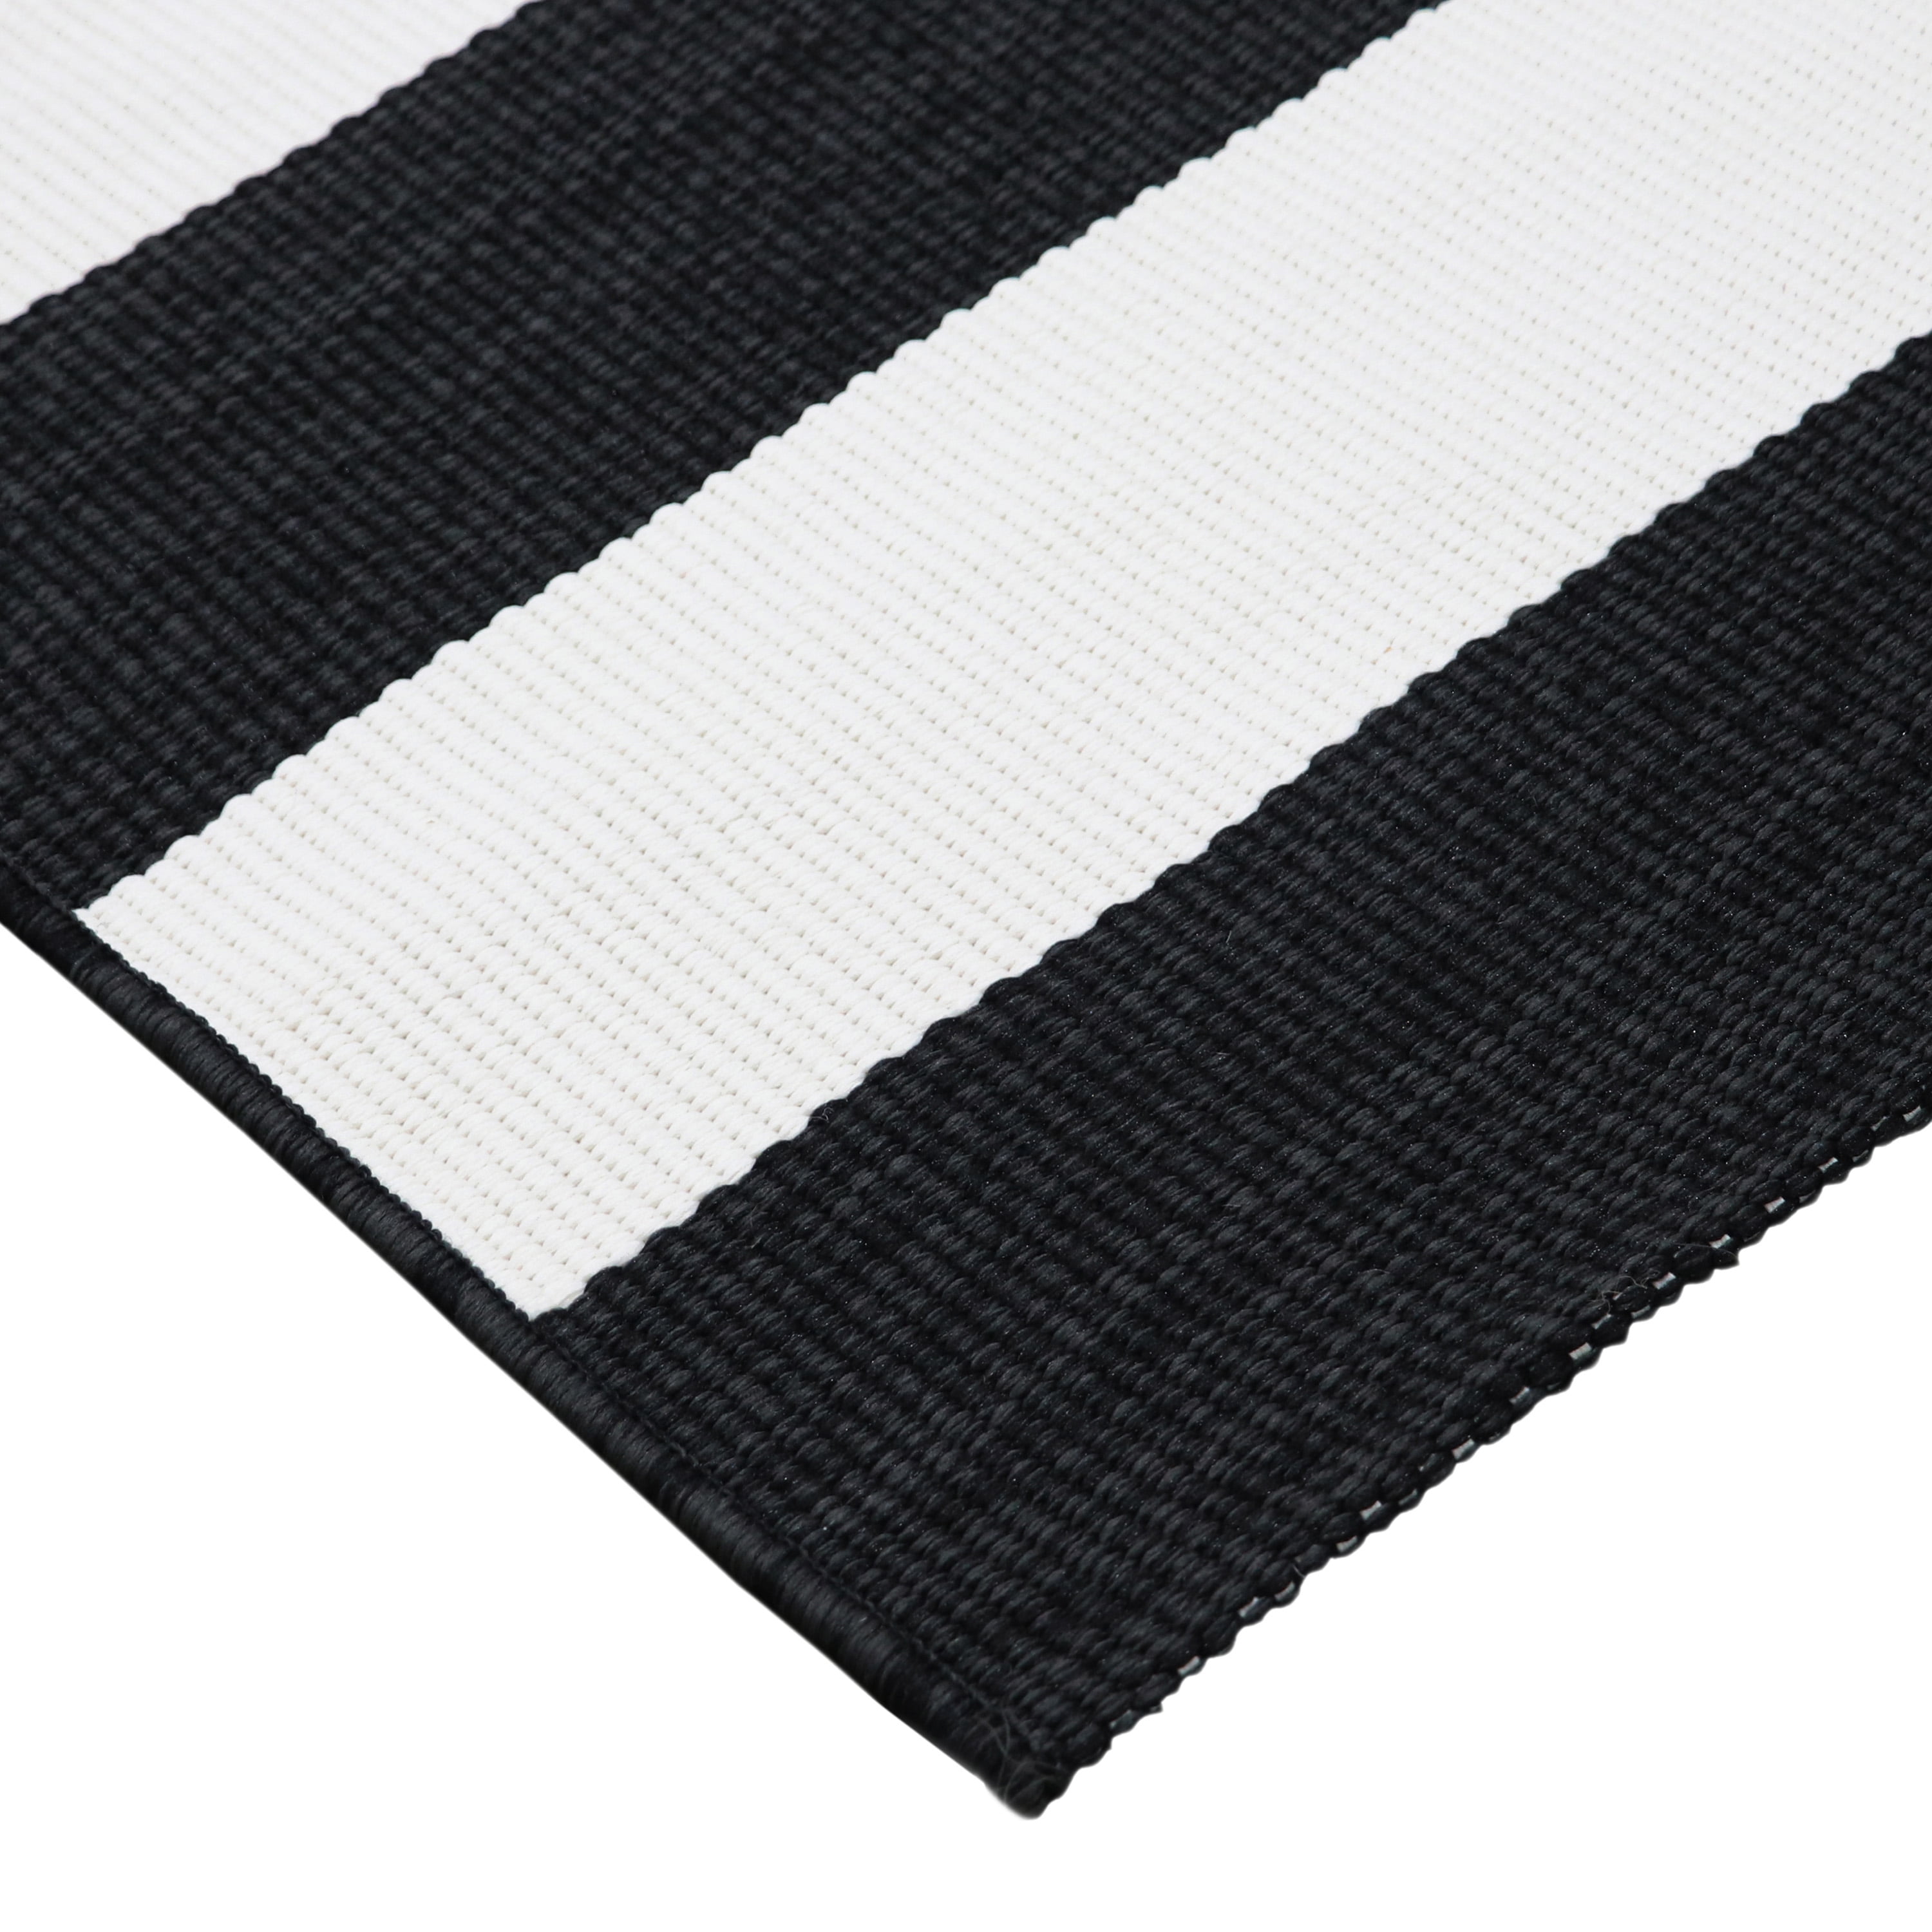 White Striped Outdoor Rug, Indoor Outdoor Black And White Striped Rug 5×7